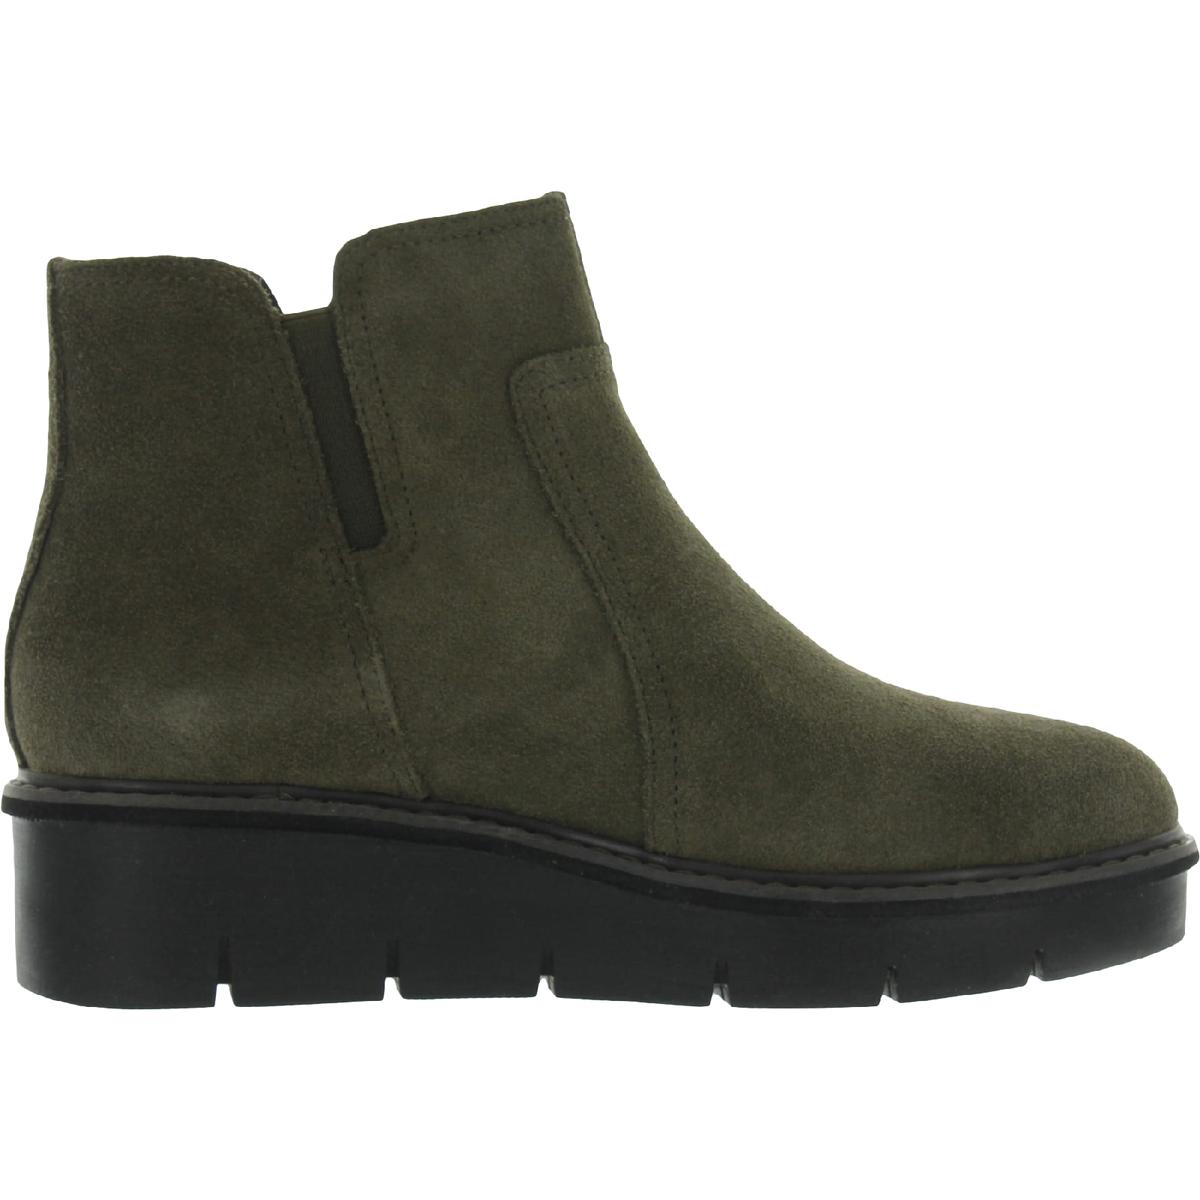 Clarks Arabell Zip Womens Suede Ankle Chelsea Boots